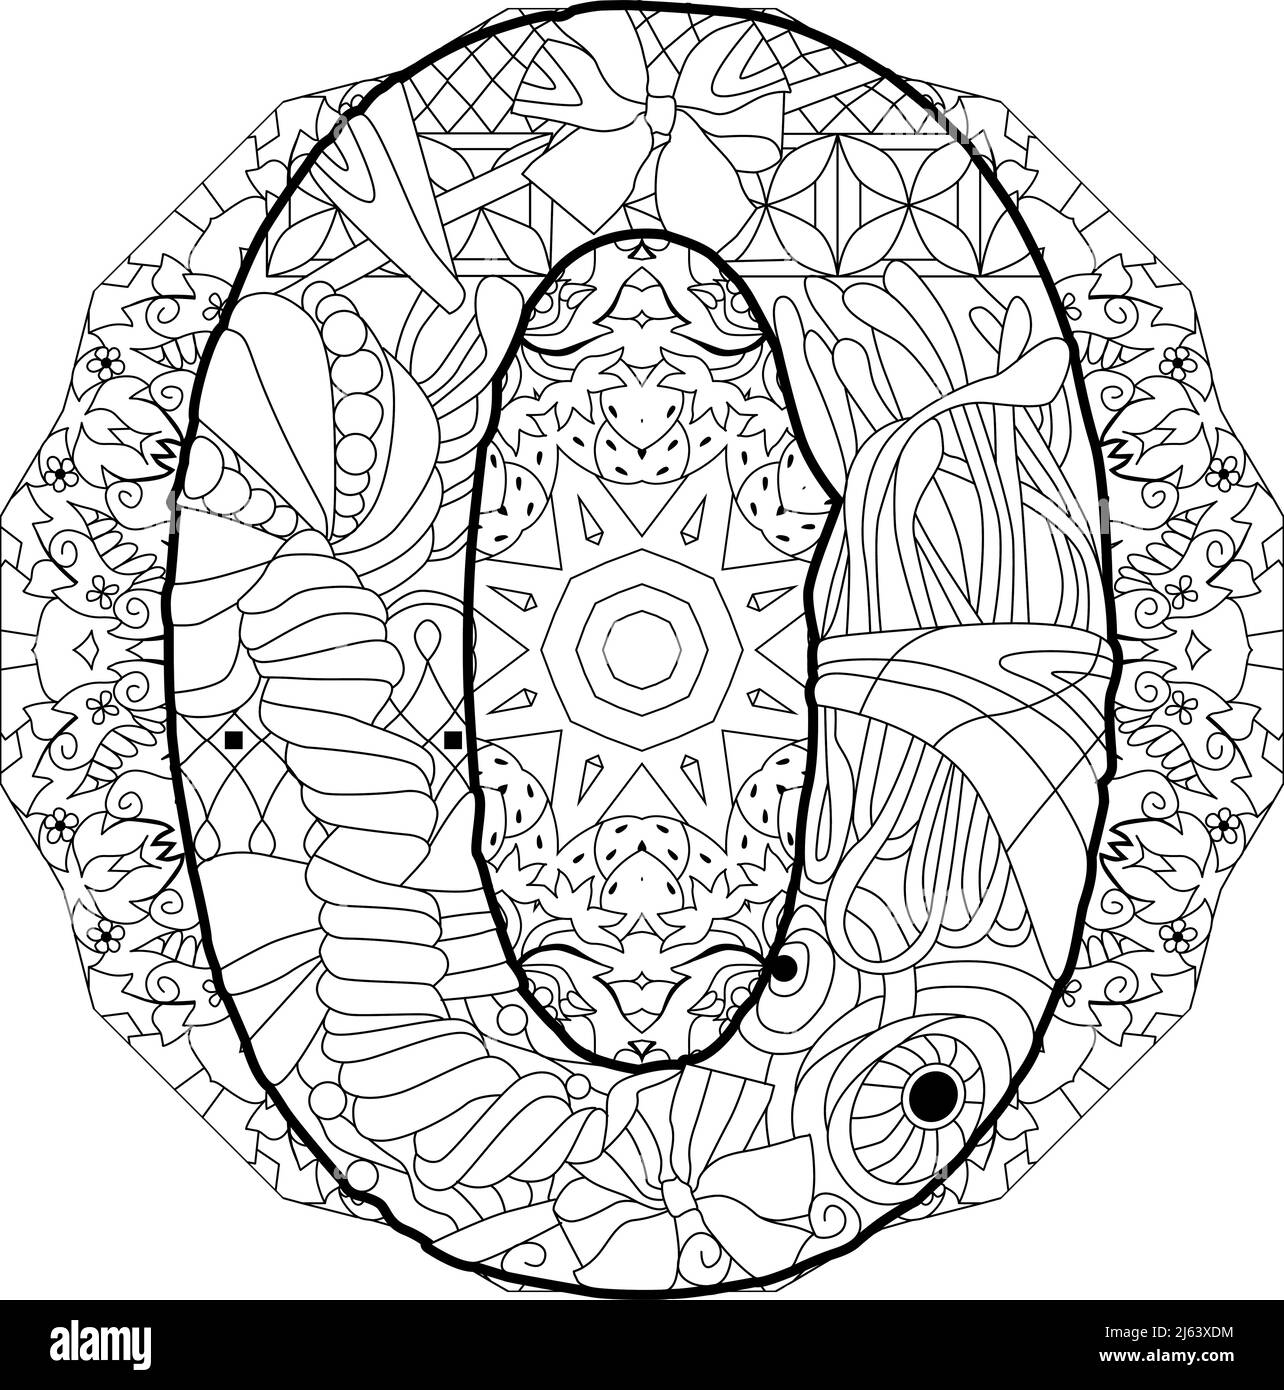 Zero number on mandala Isolated zentangle illustration for coloring Stock Vector